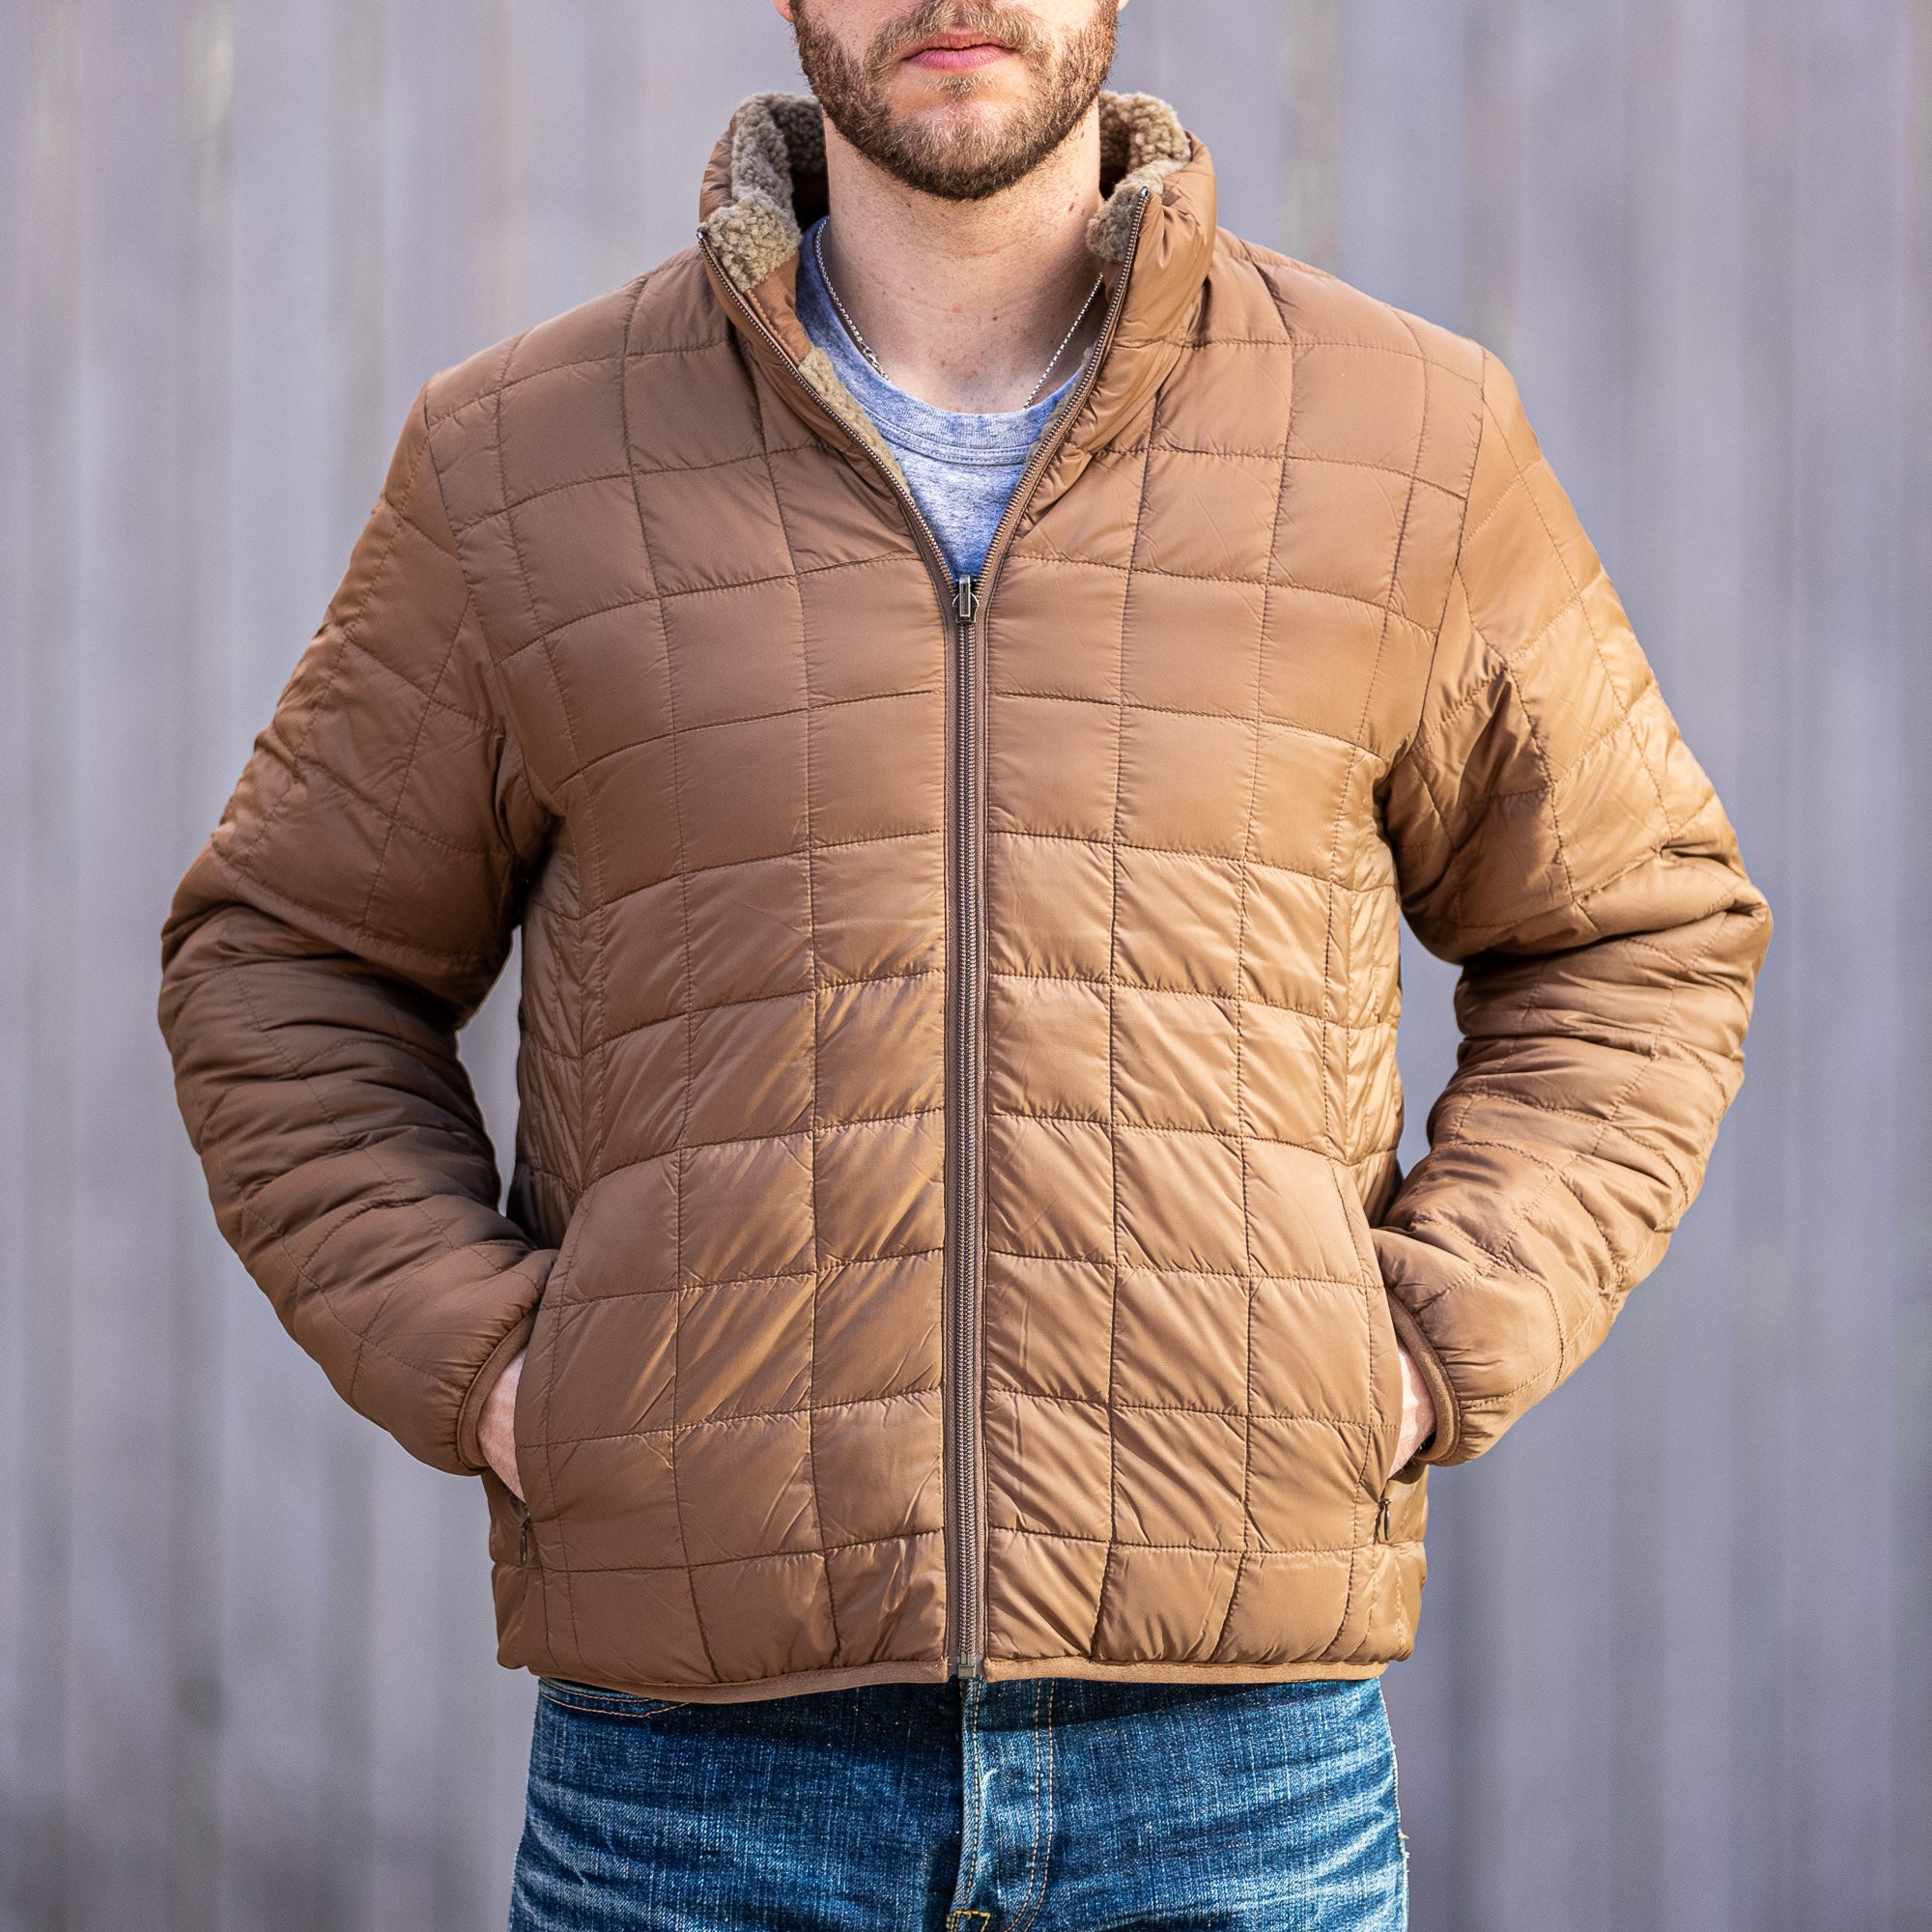 TAION - Reversible Jackets for Men